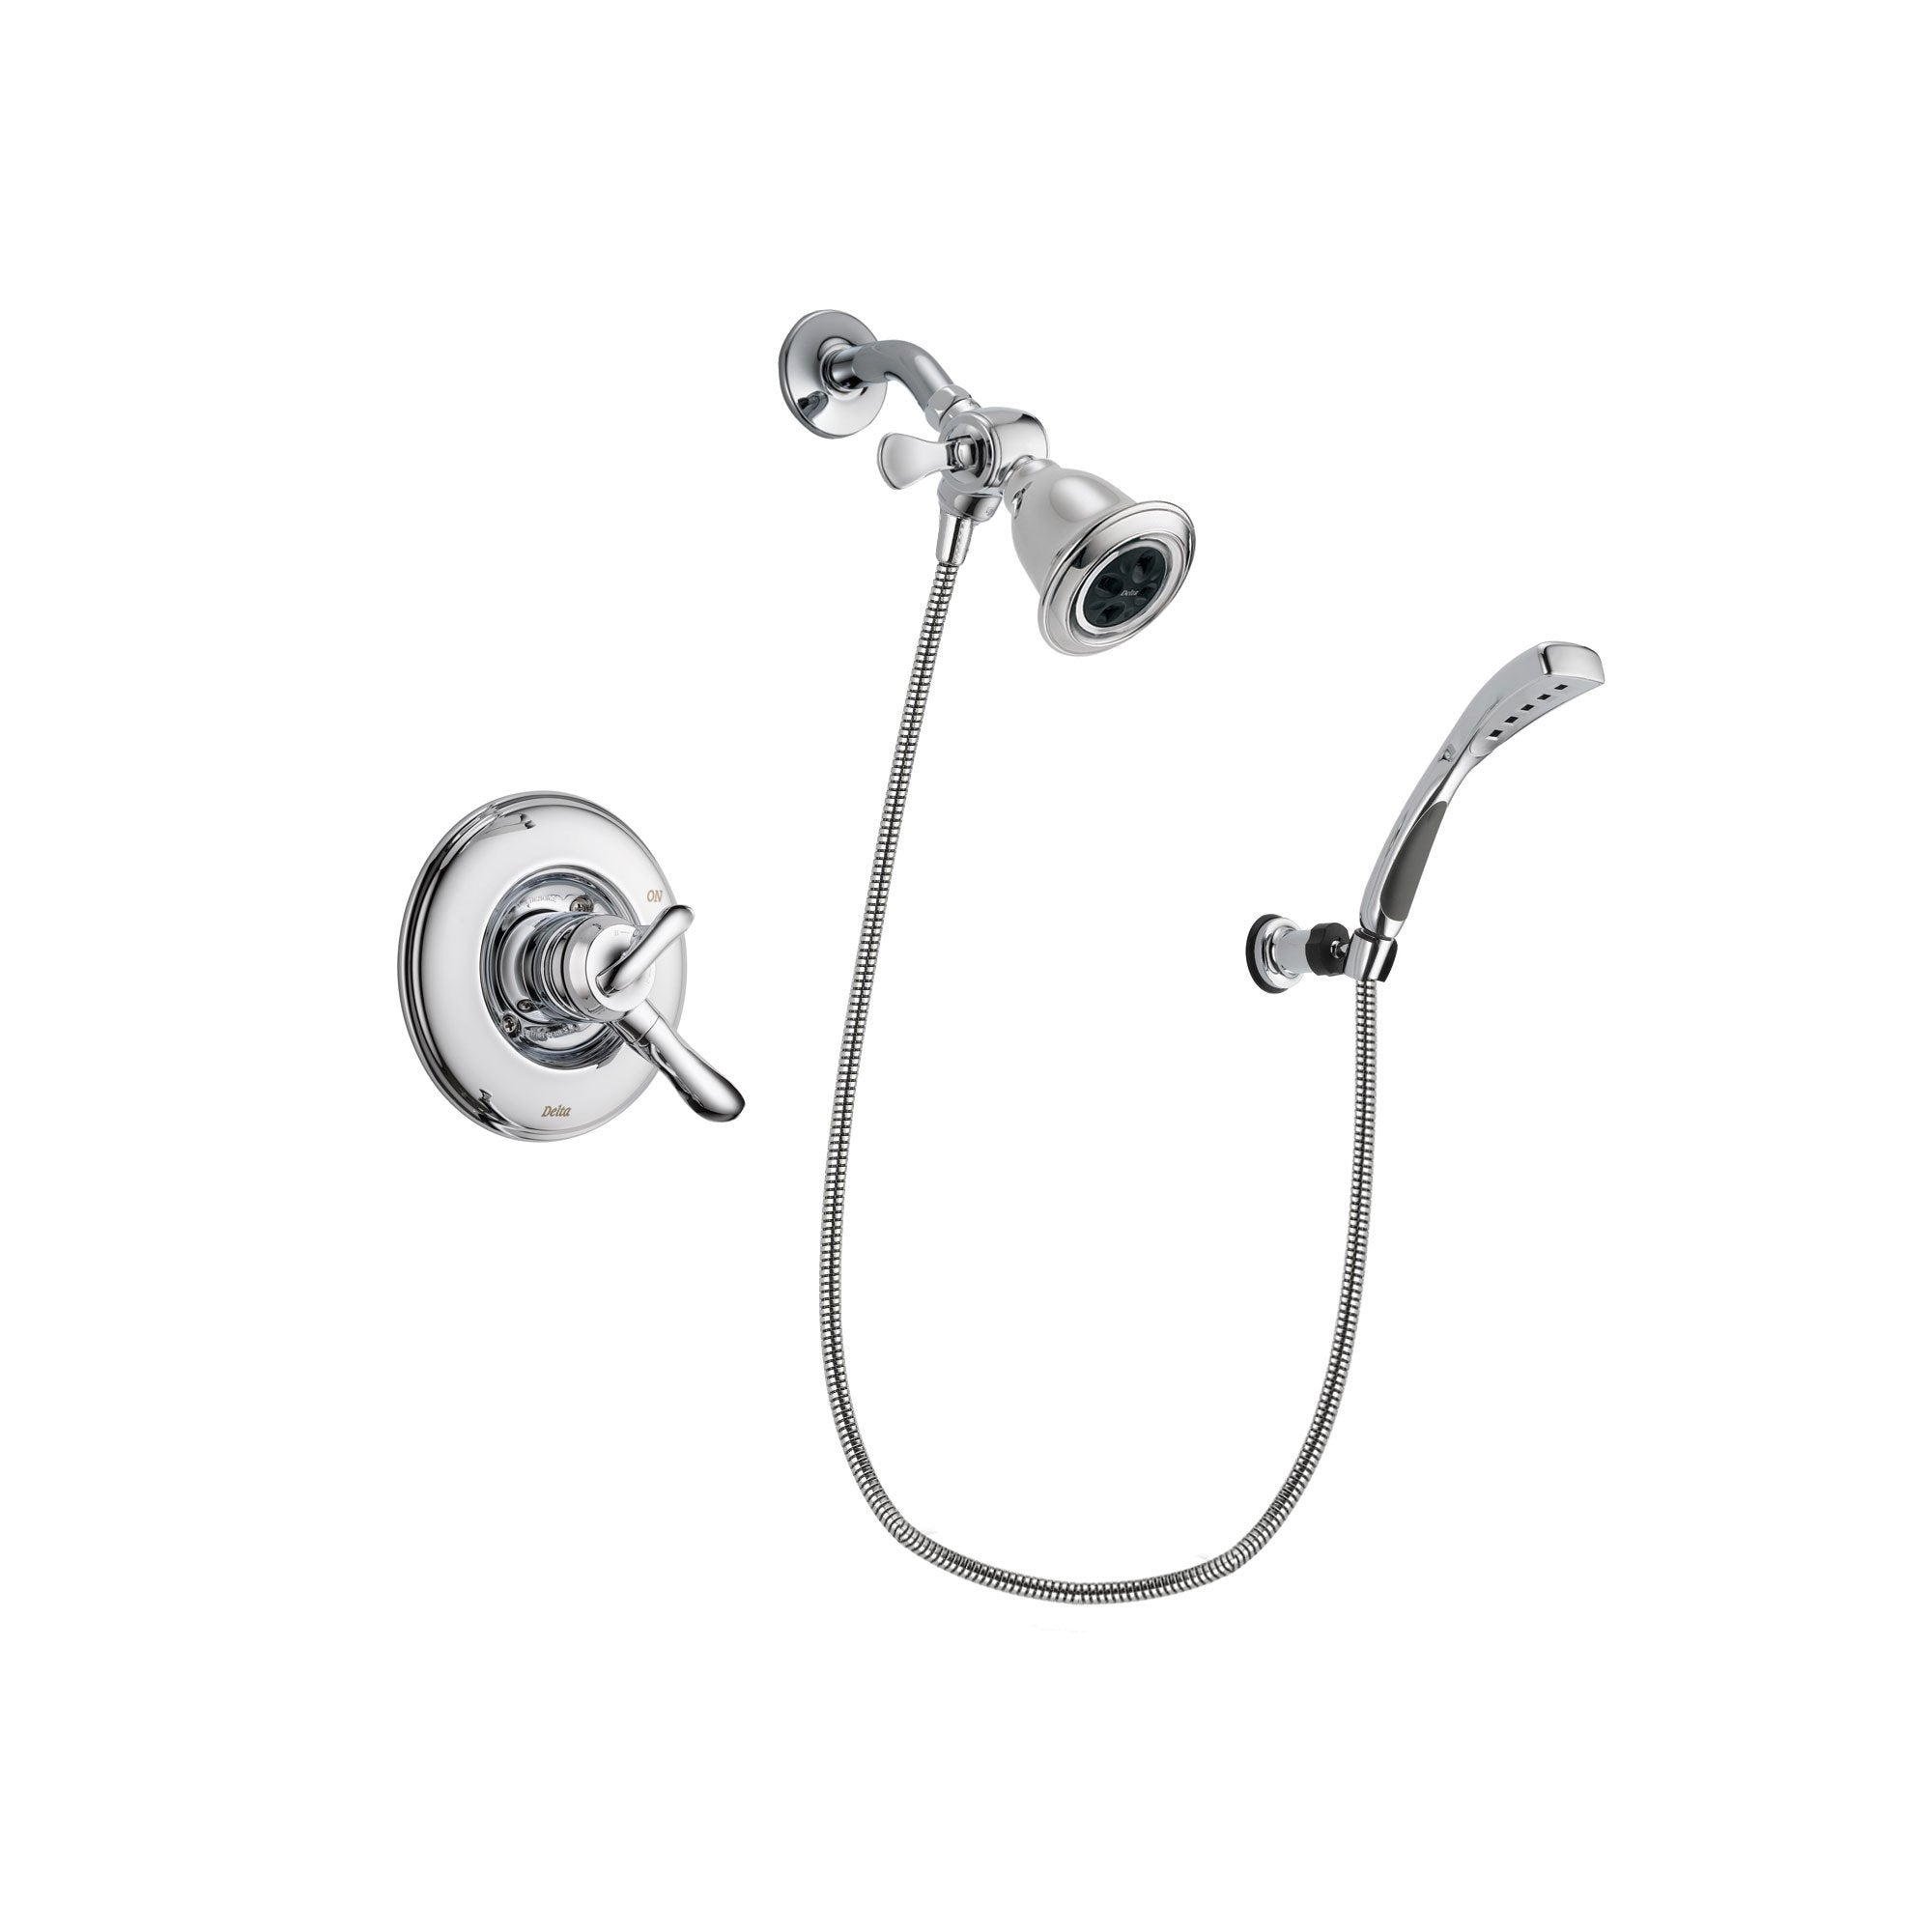 Delta Linden Chrome Finish Dual Control Shower Faucet System Package with Water Efficient Showerhead and Wall-Mount Bracket with Handheld Shower Spray Includes Rough-in Valve DSP1034V